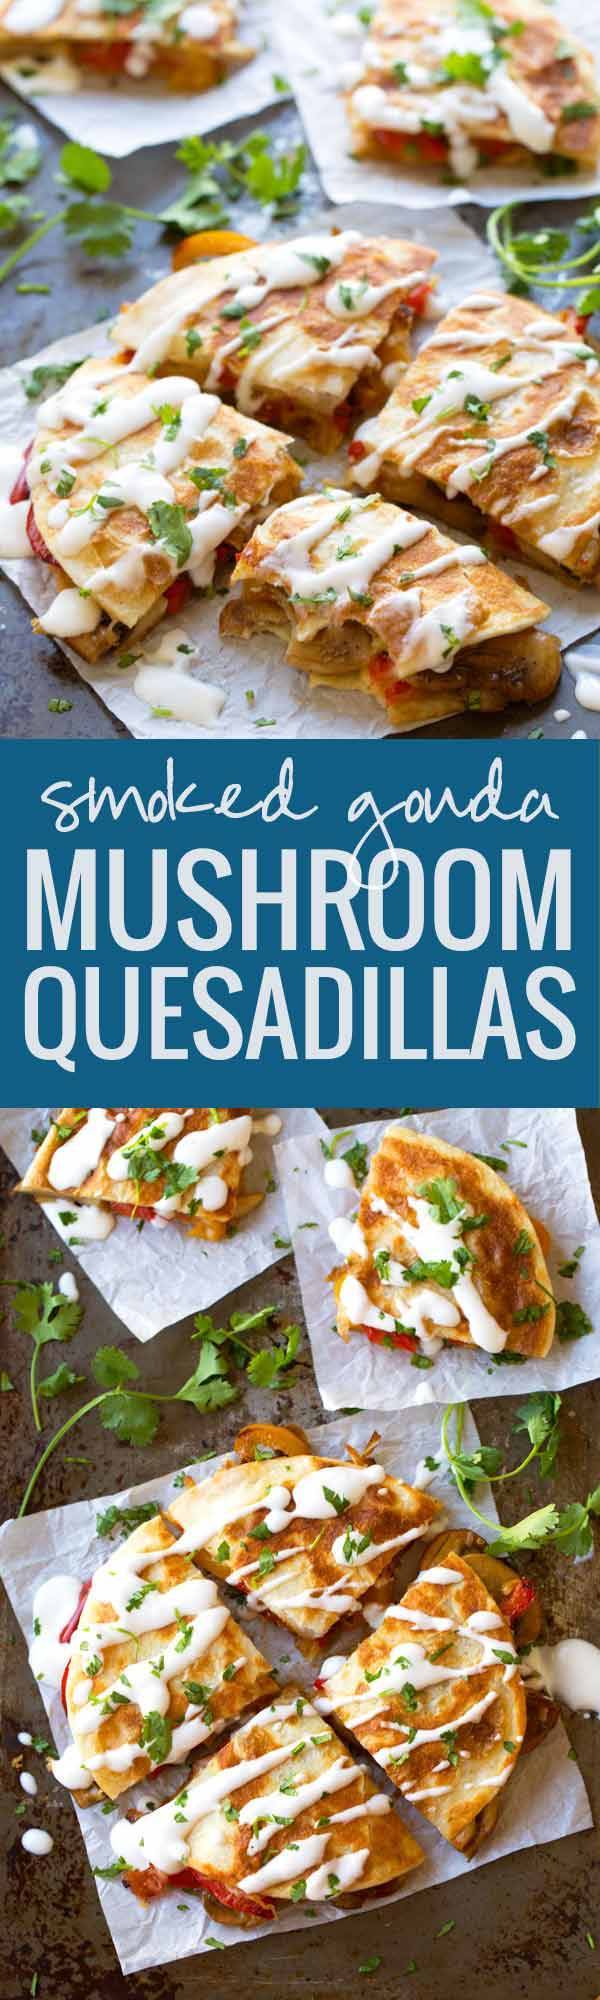 These Smoked Gouda Mushroom Quesadillas are deeeelicious! Creamy and melty, golden and crunchy, perfect for a quick vegetarian lunch.